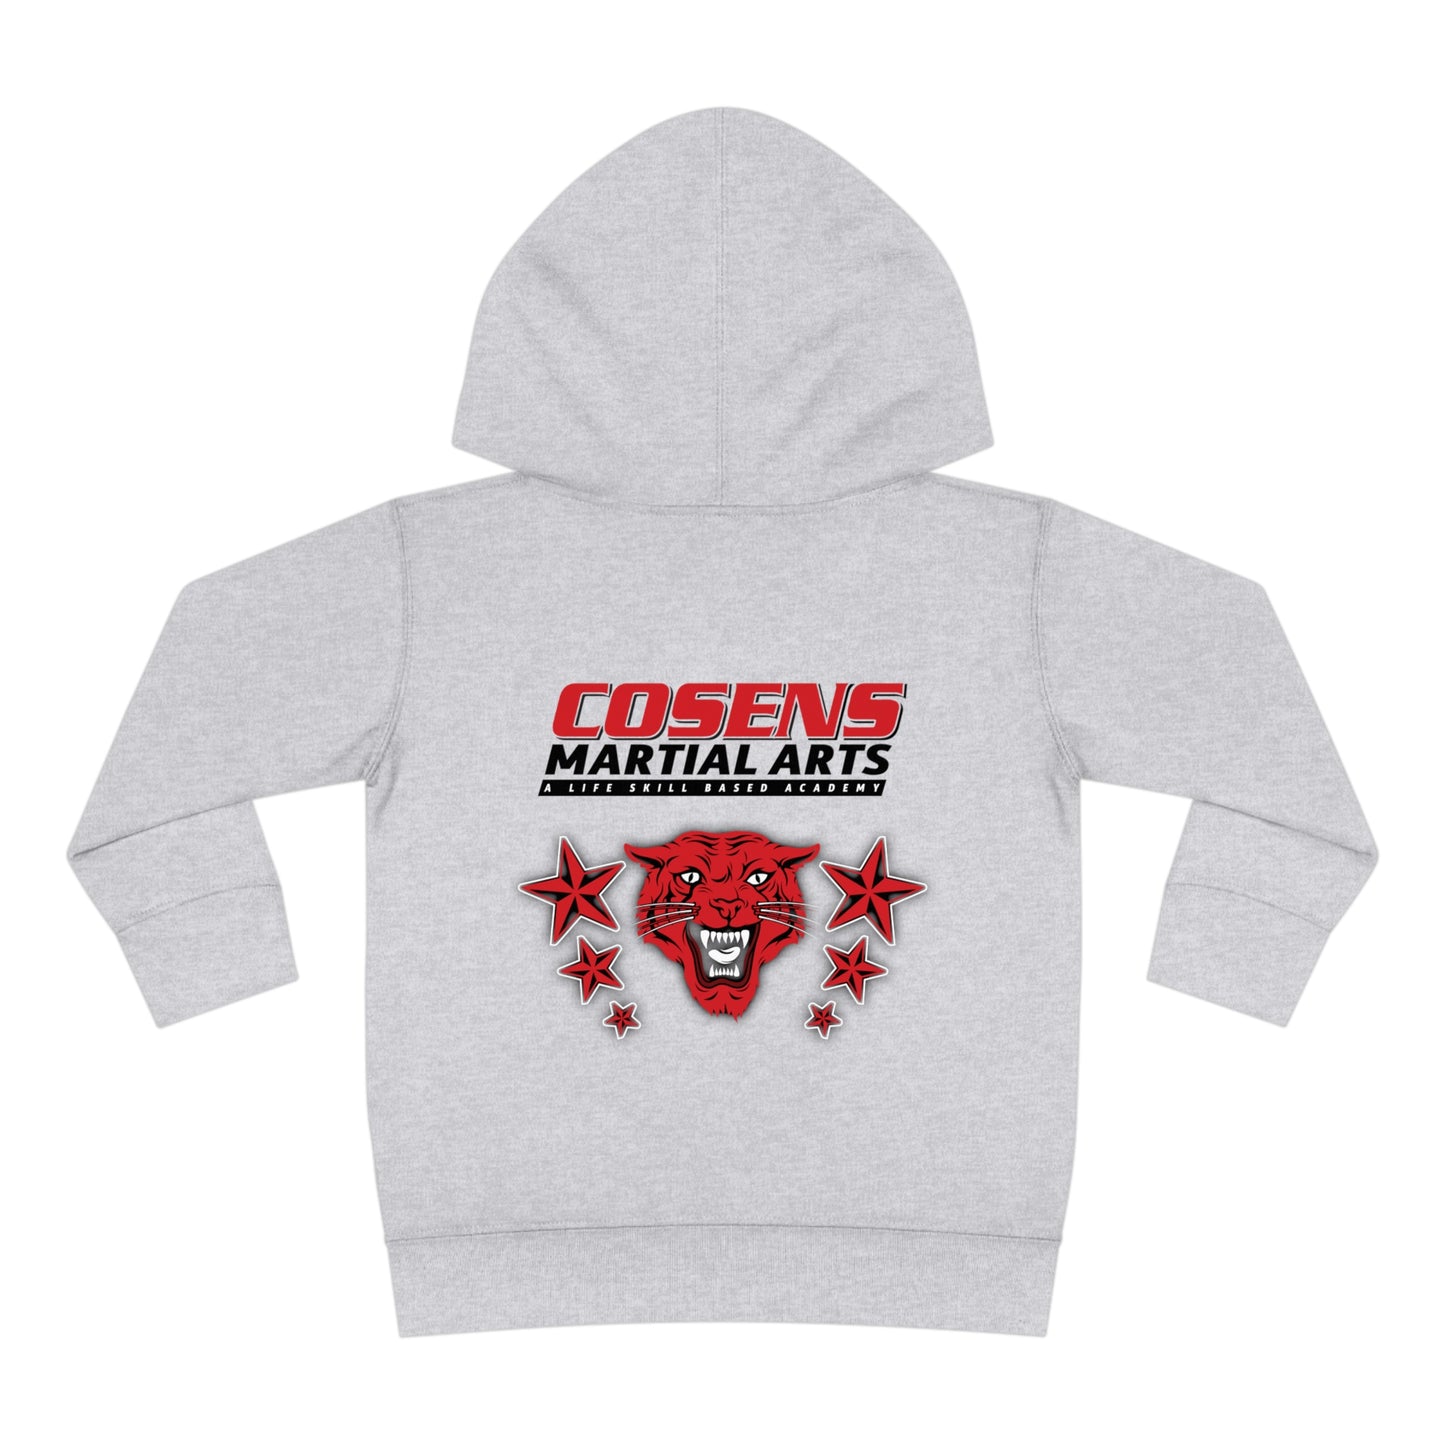 Toddler Pullover Sweatshirt (Not customized with name)